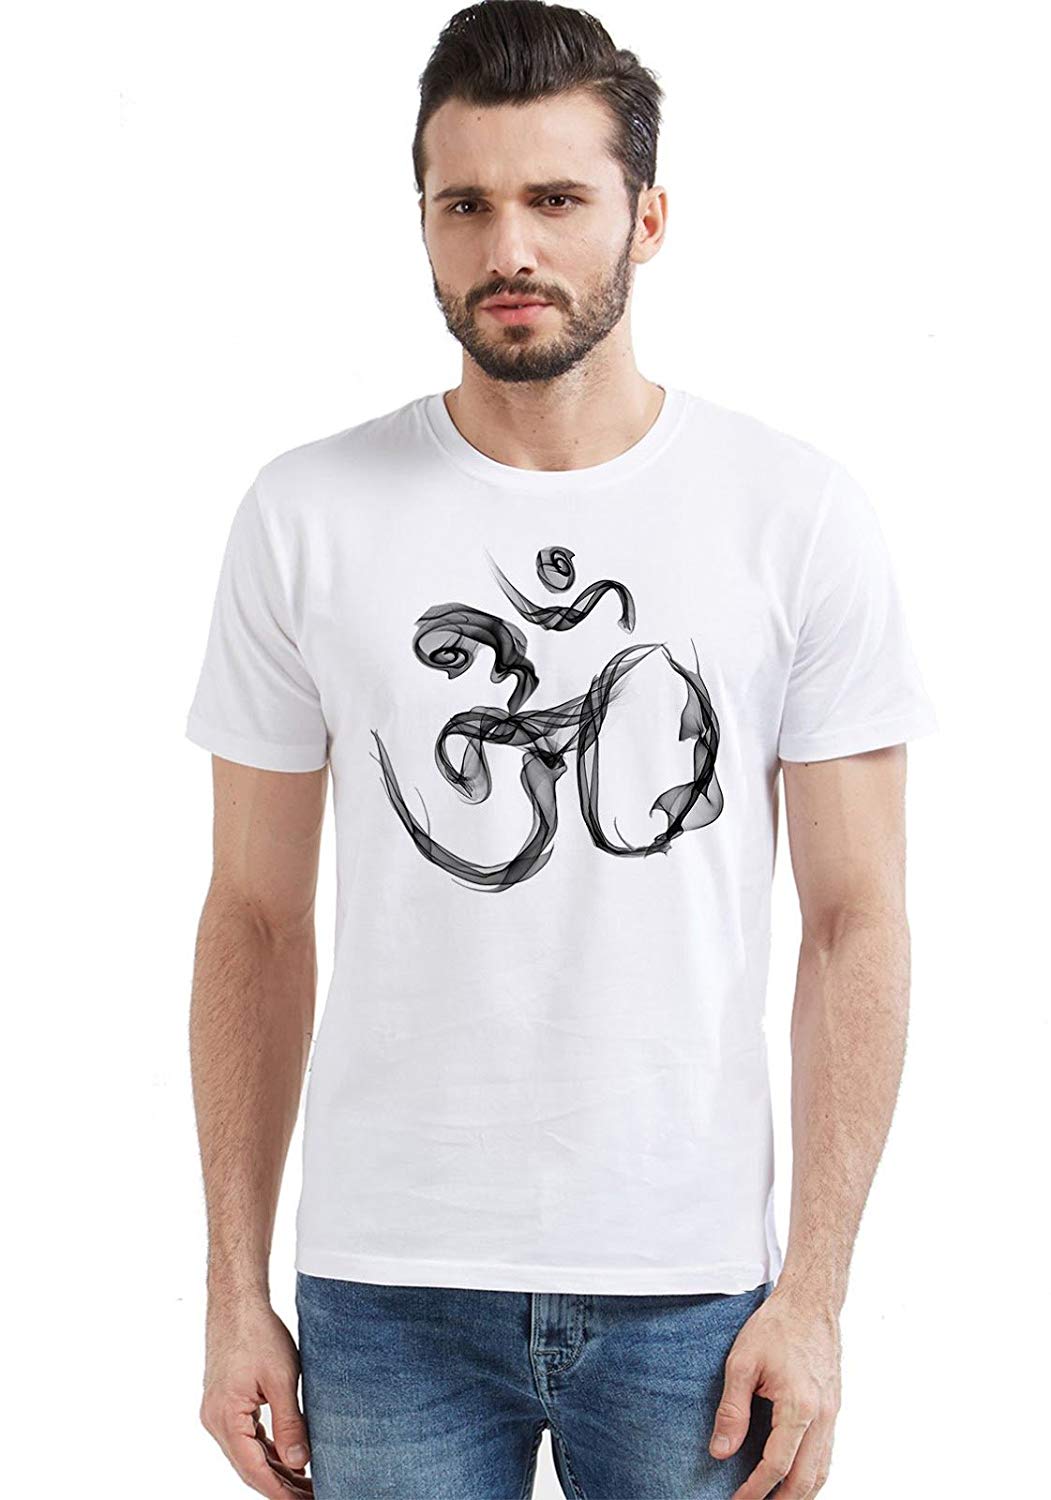 DOUBLE F ROUND NECK HALF SLEEVE WHITE COLOR LATEST OM PRINTED T-SHIRT FOR MEN